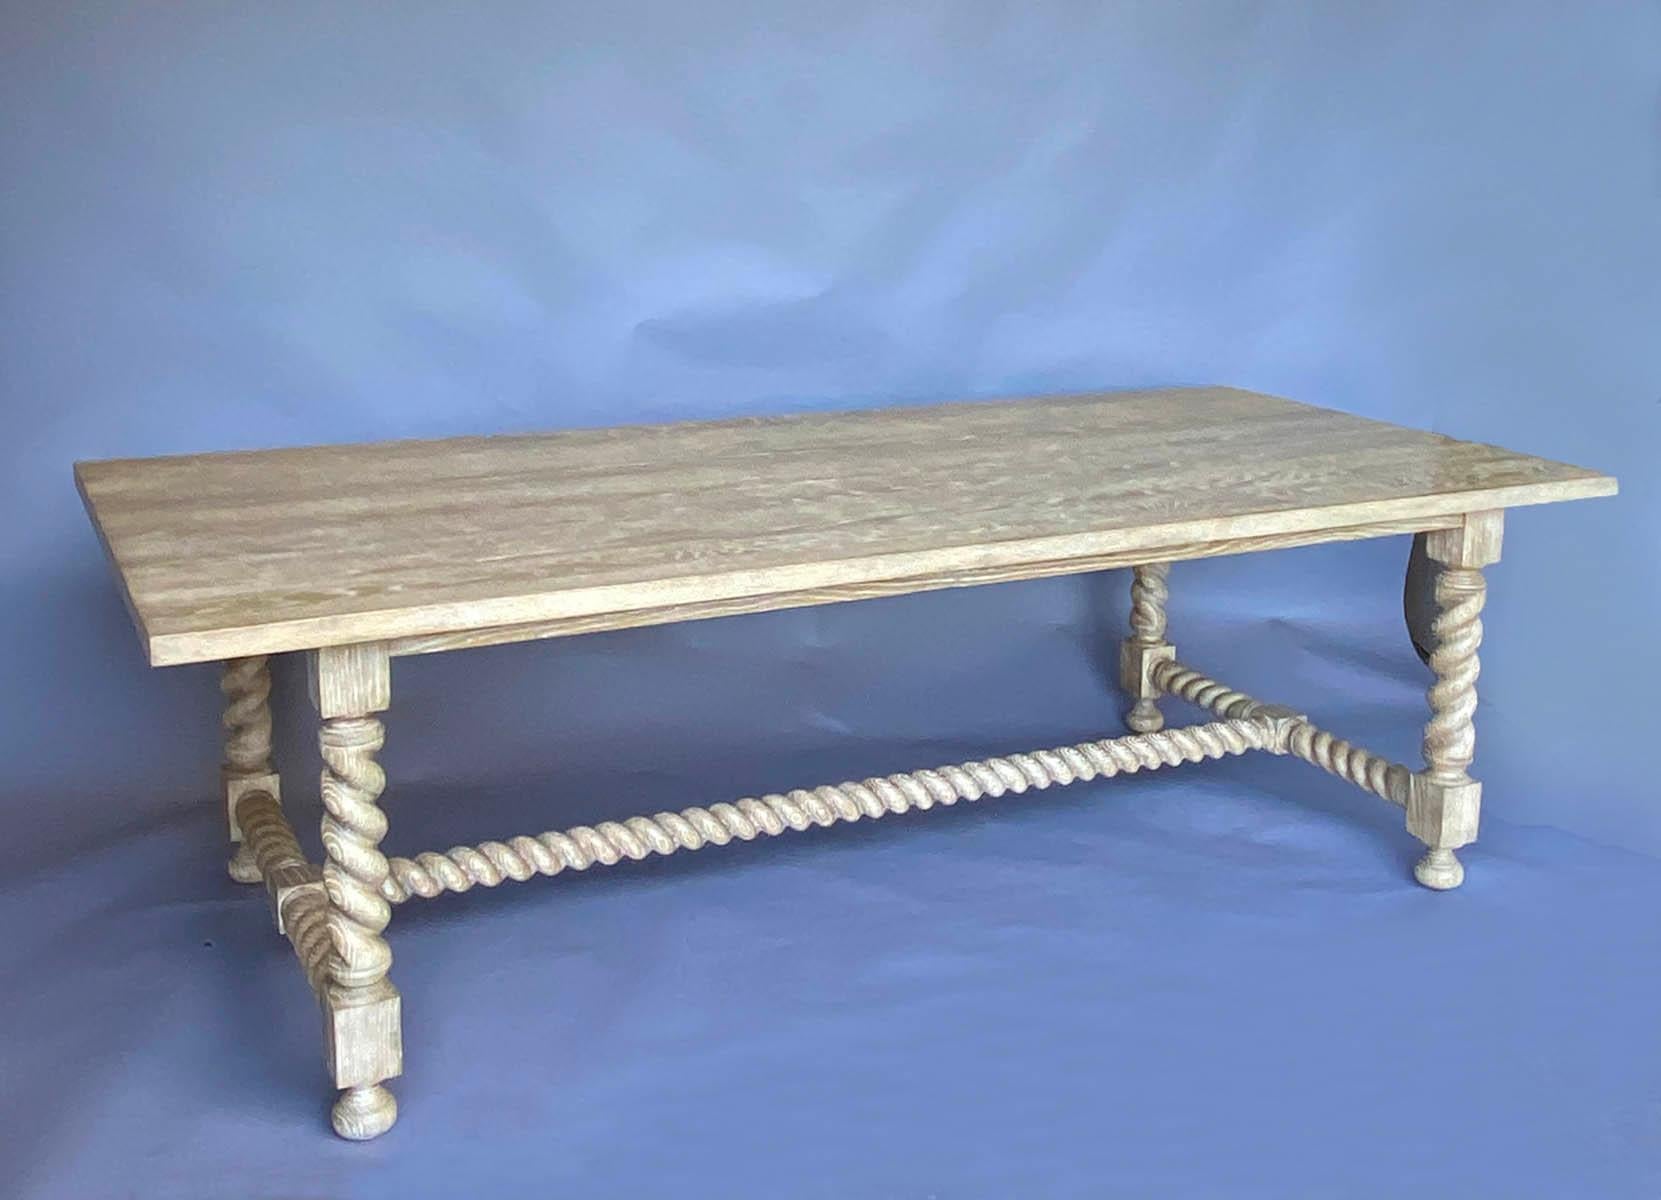 Dos Gallos custom barley twist table seen here in oak with custom finish. Can be made in any size in a variety of finishes. As shown 96 x 44 x 30. All our custom pieces are bench made and hand finished in Los Angeles by Dos Gallos Studio.
PRICES ARE